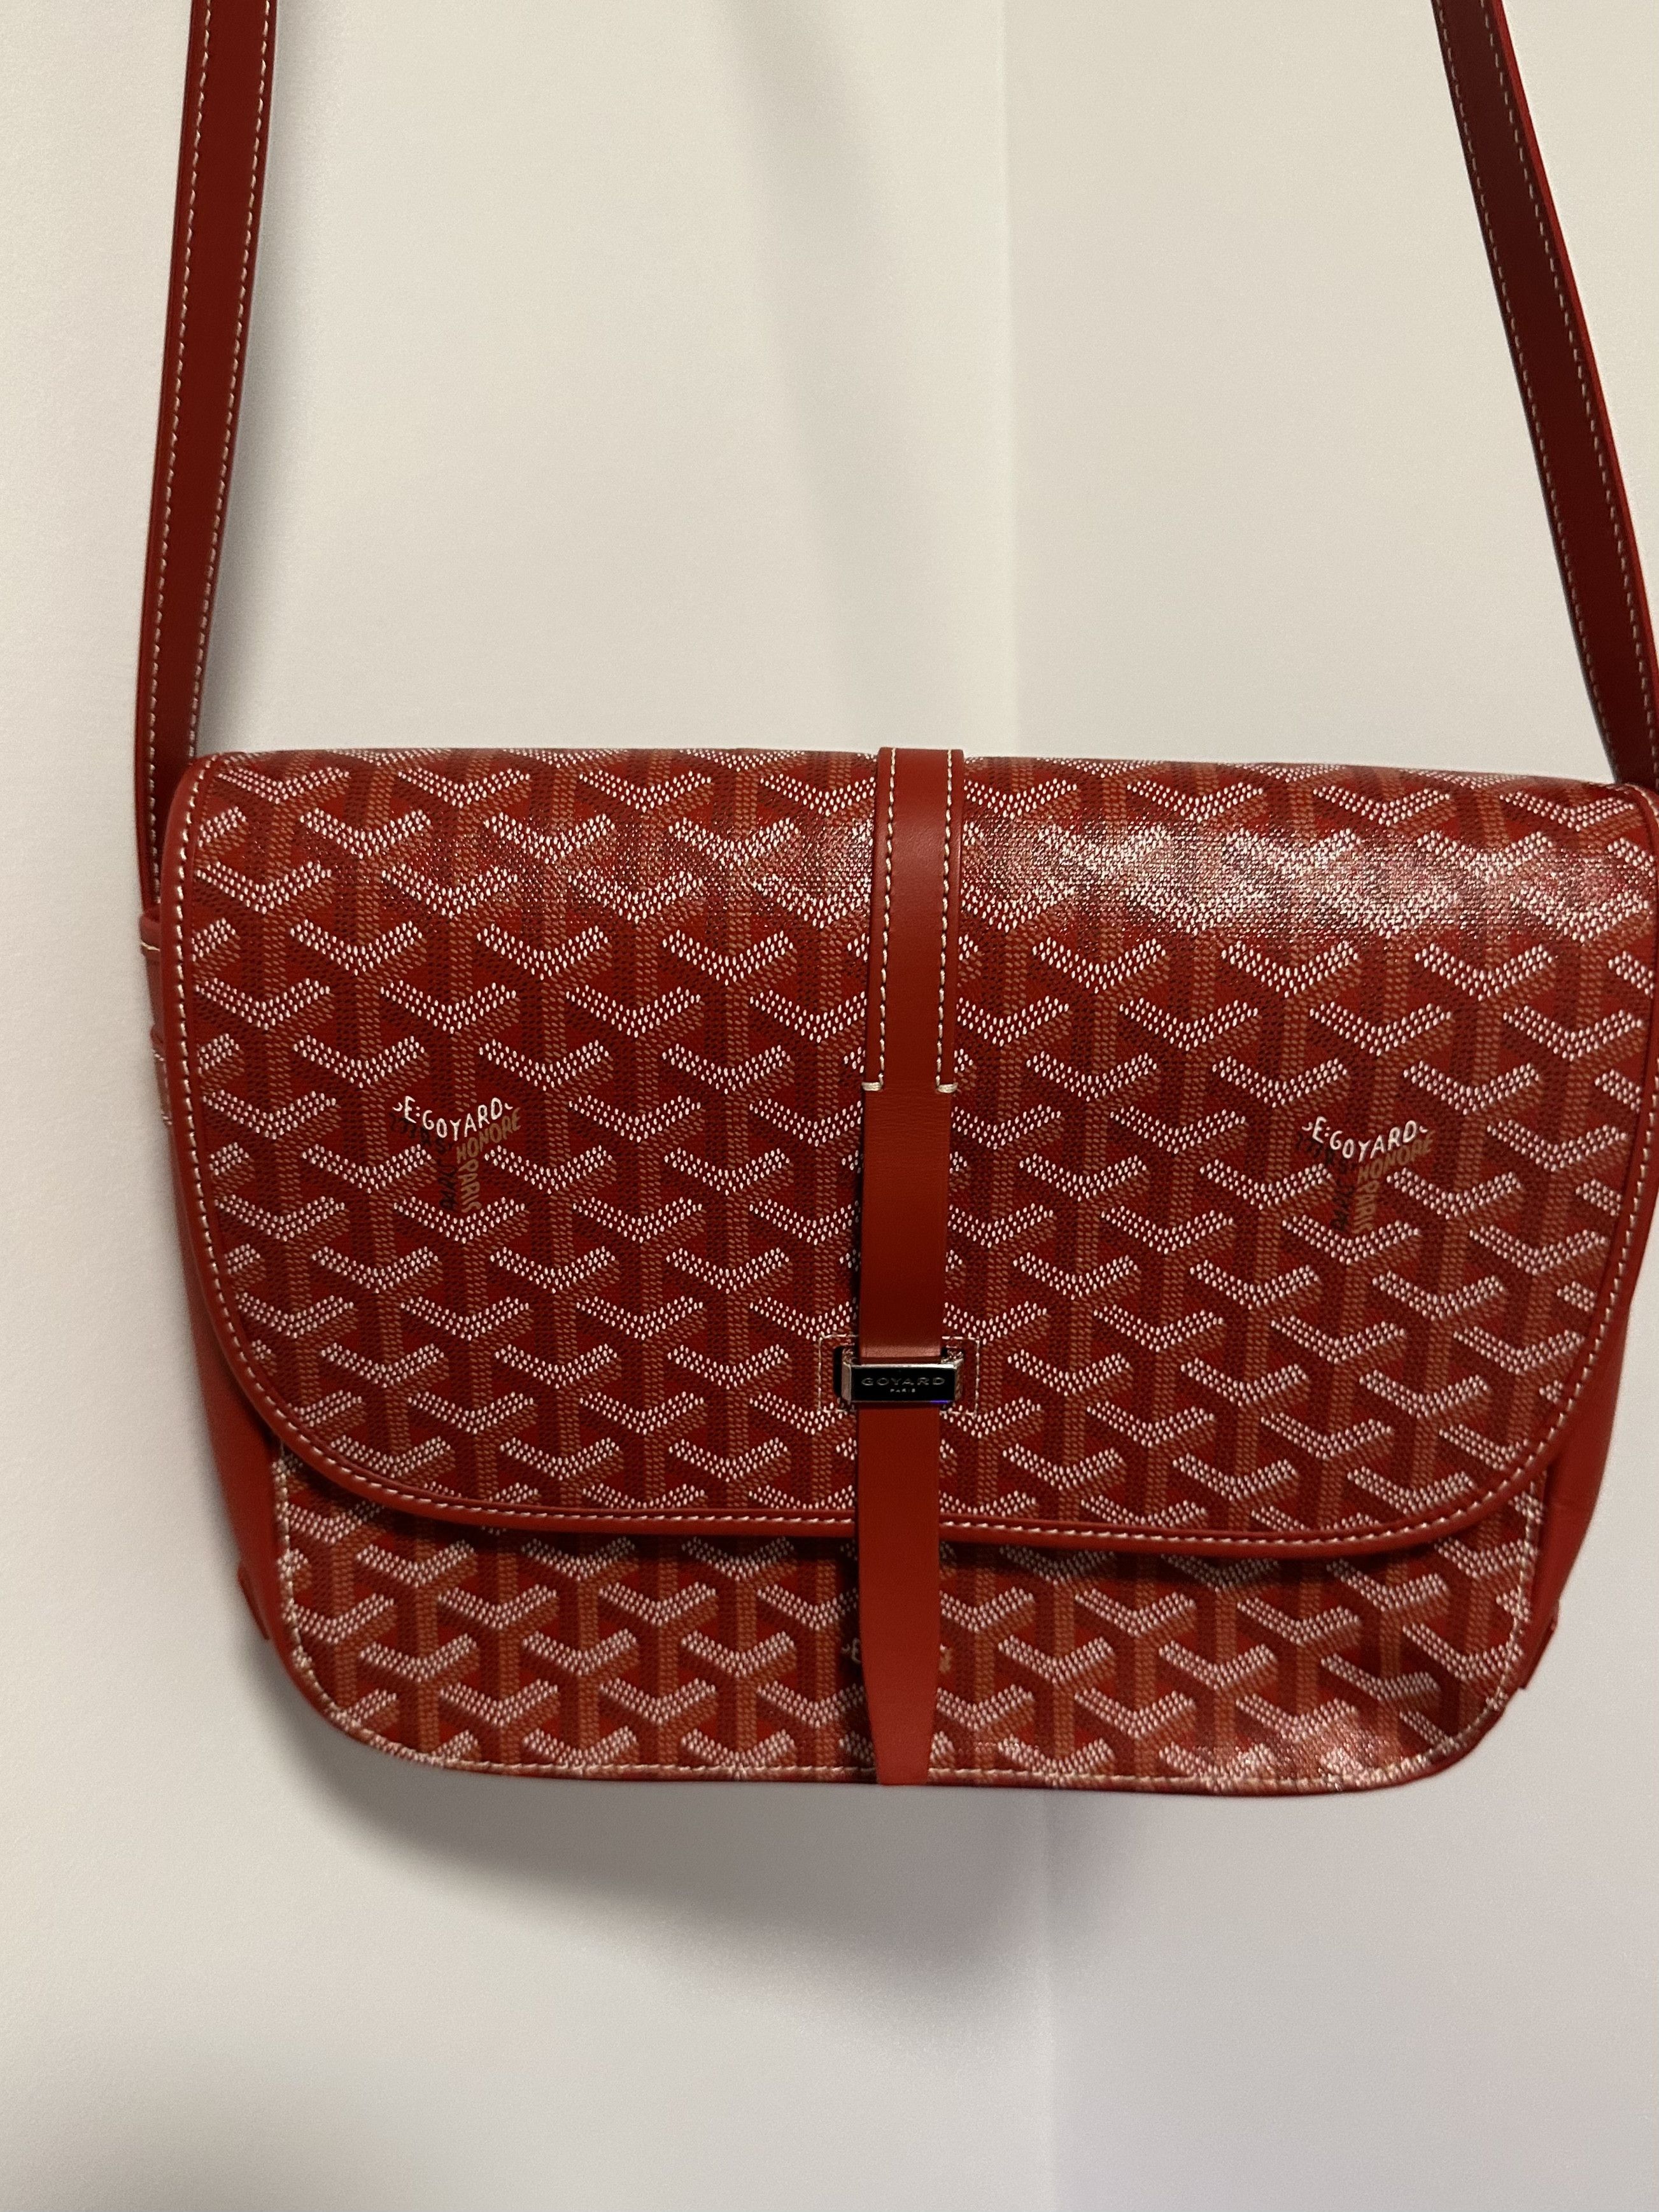 🛑SOLD🛑GOYARD red Belvedere MM messenger bag. Coded canvas. This